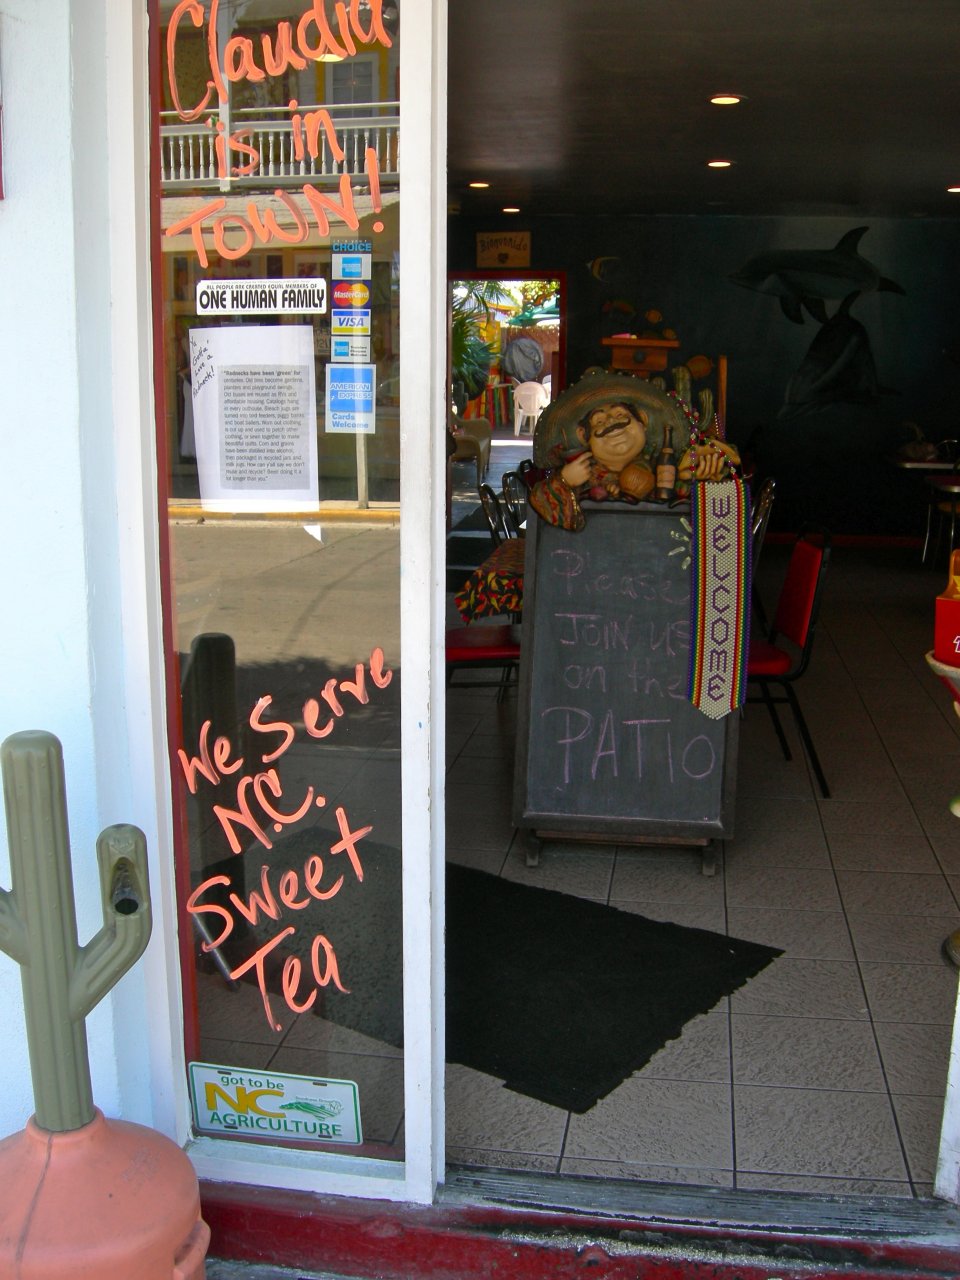 Mexican place on Key West services North Carolina sweet tea?